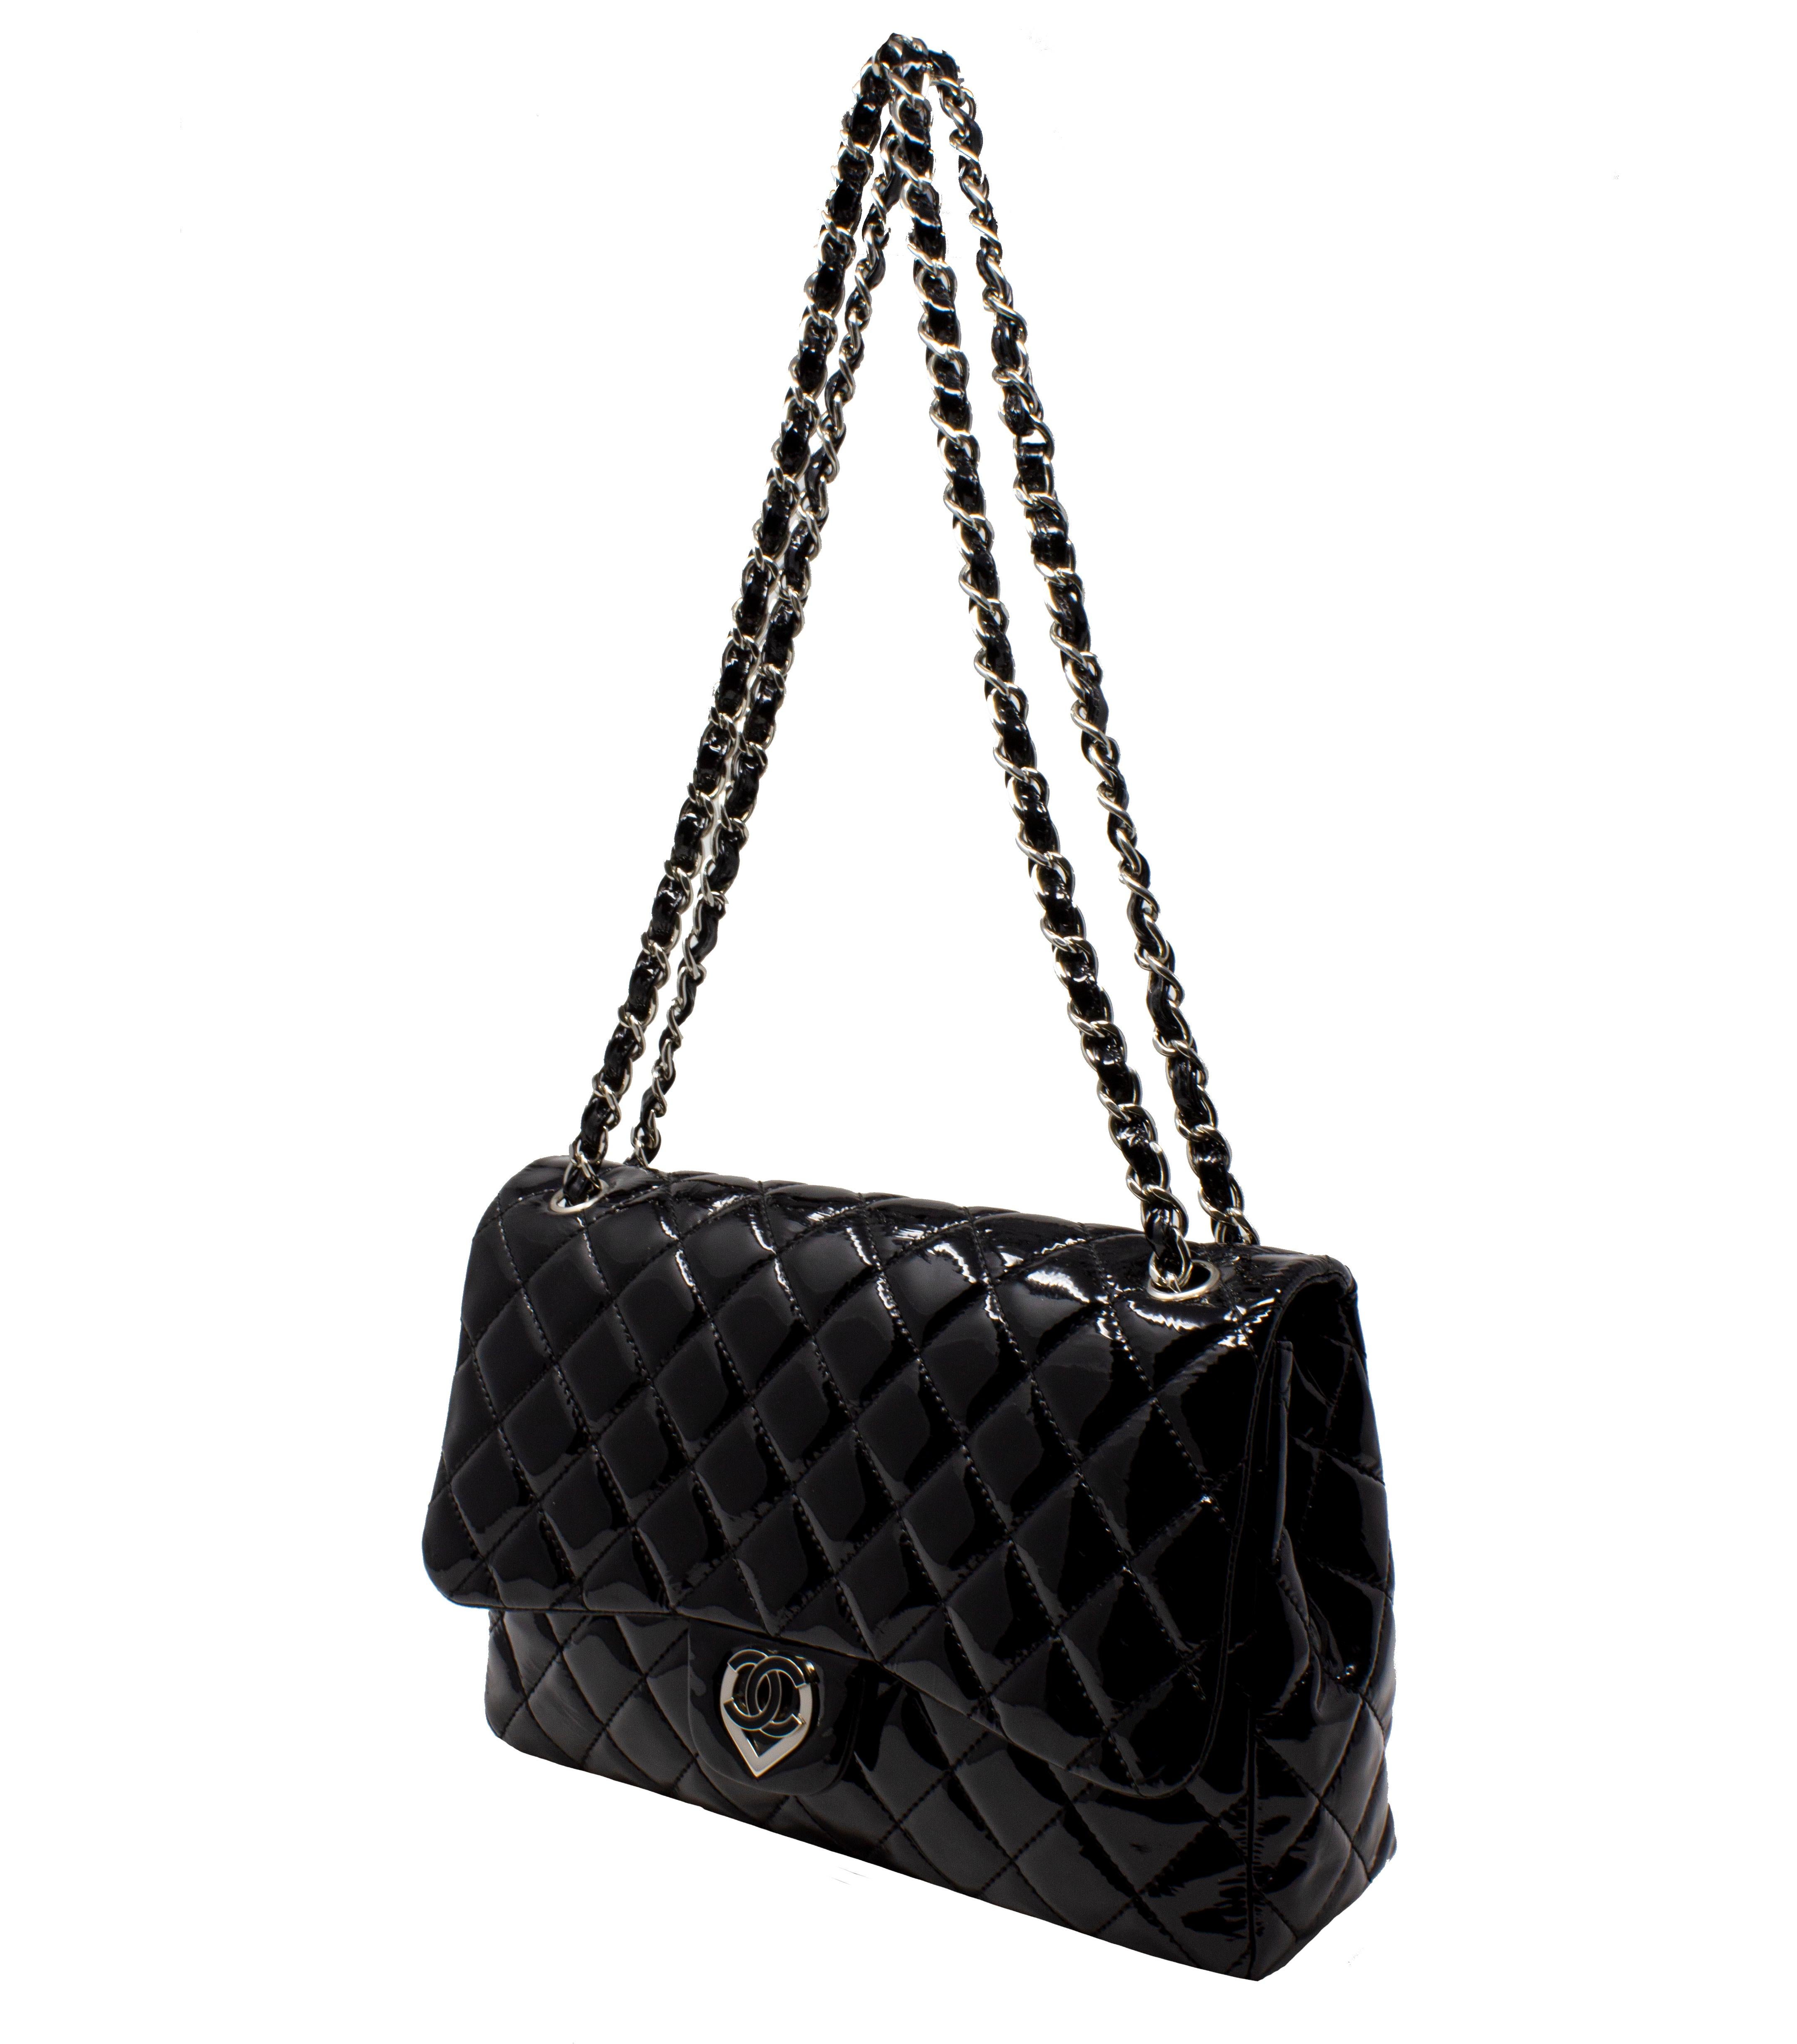 We LOVE this limited edition jumbo flap bag from 2008-2009! The hardware is unique and spirited and works perfectly with the patent leather.

Key features aside from the black patent leather and jumbo size? Rendered in silver hardware, features a